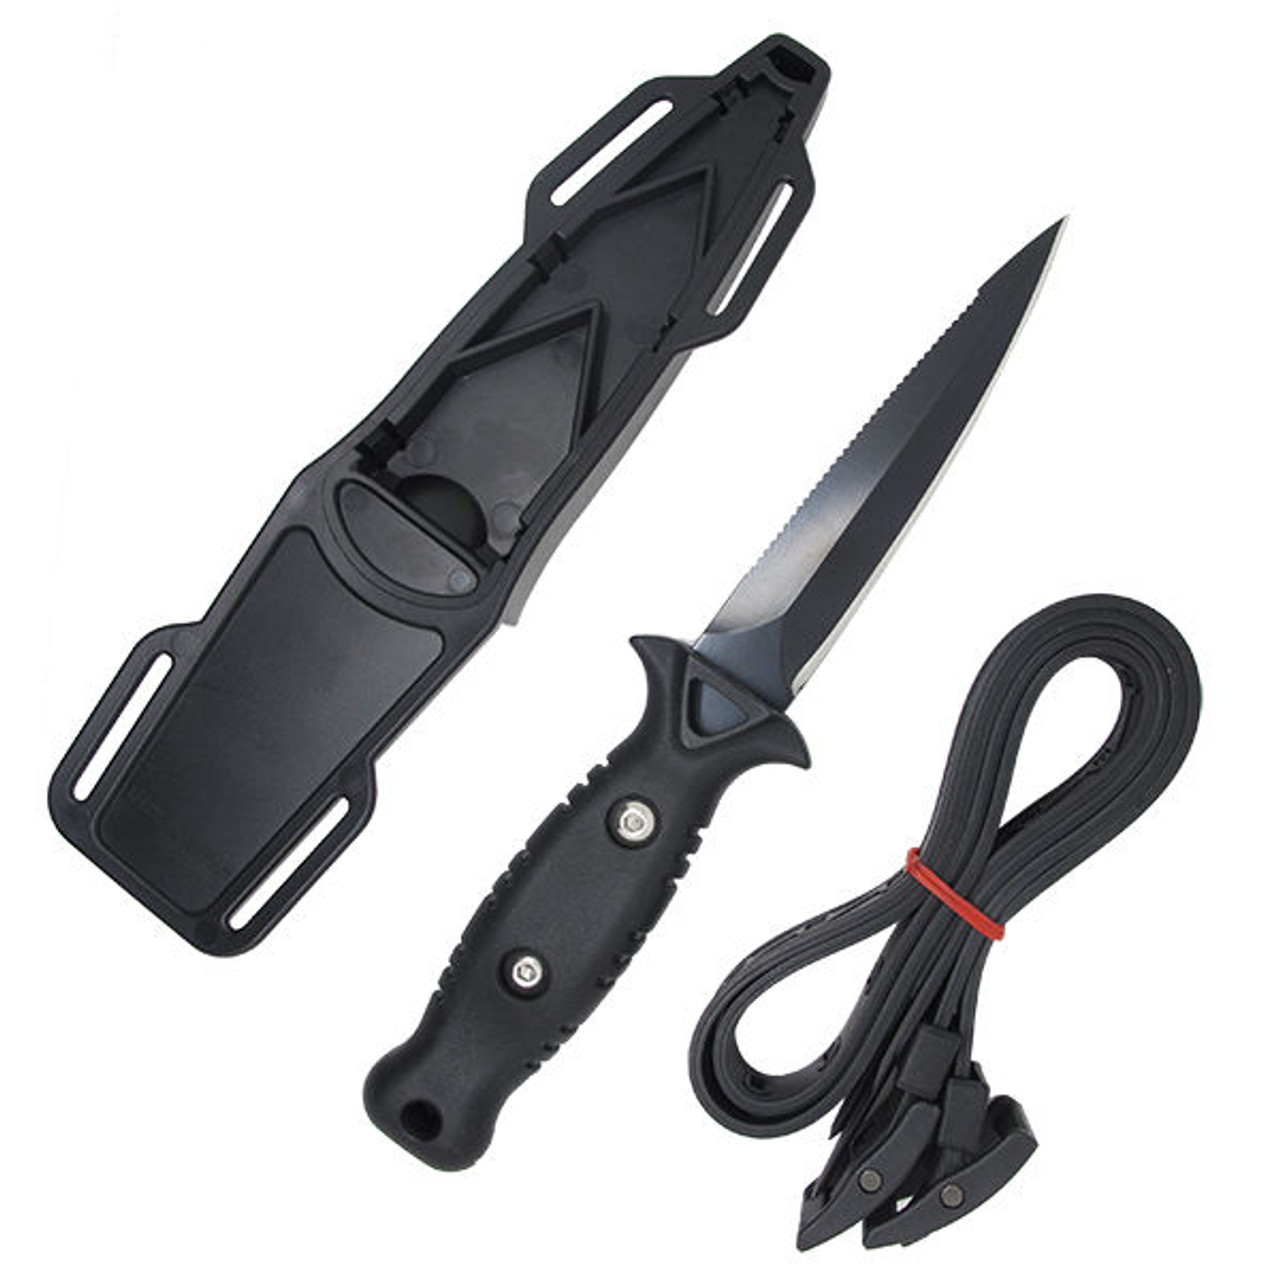 8.5 inch Spearfishing Low Volume Point-Tip Sharp Black Blade Dive Knife w/ Straps, White